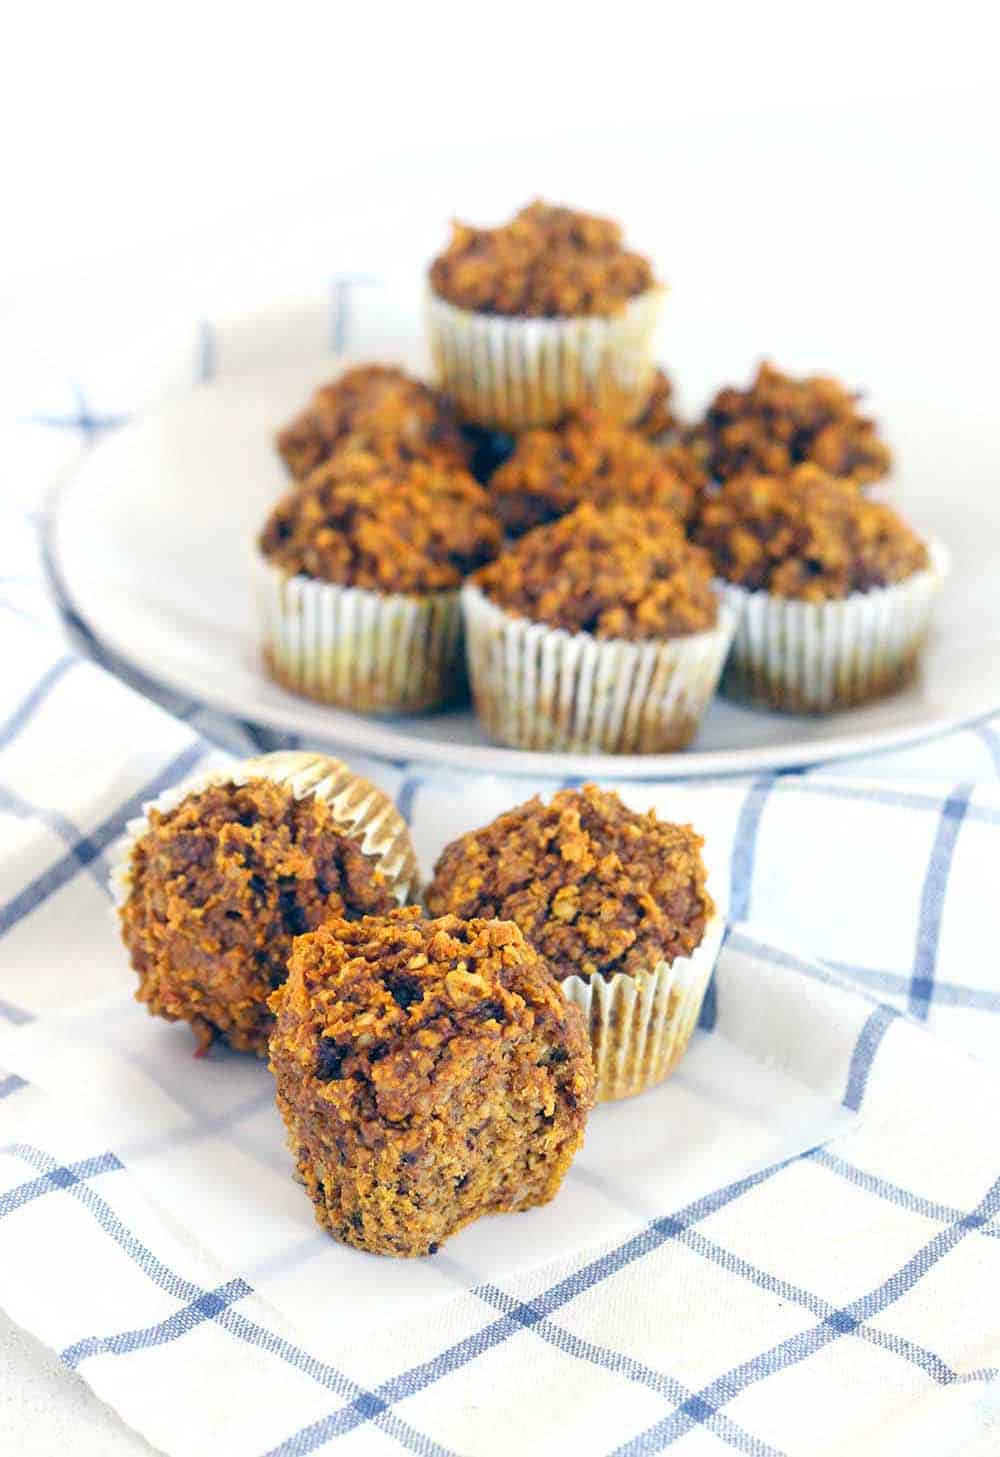 These Gluten Free Pumpkin Oat Muffins are packed with healthy ingredients like oats, pumpkin, and walnuts. They're more like a delicious energy bar than a muffin, and are the perfect hearty grab and go breakfast.